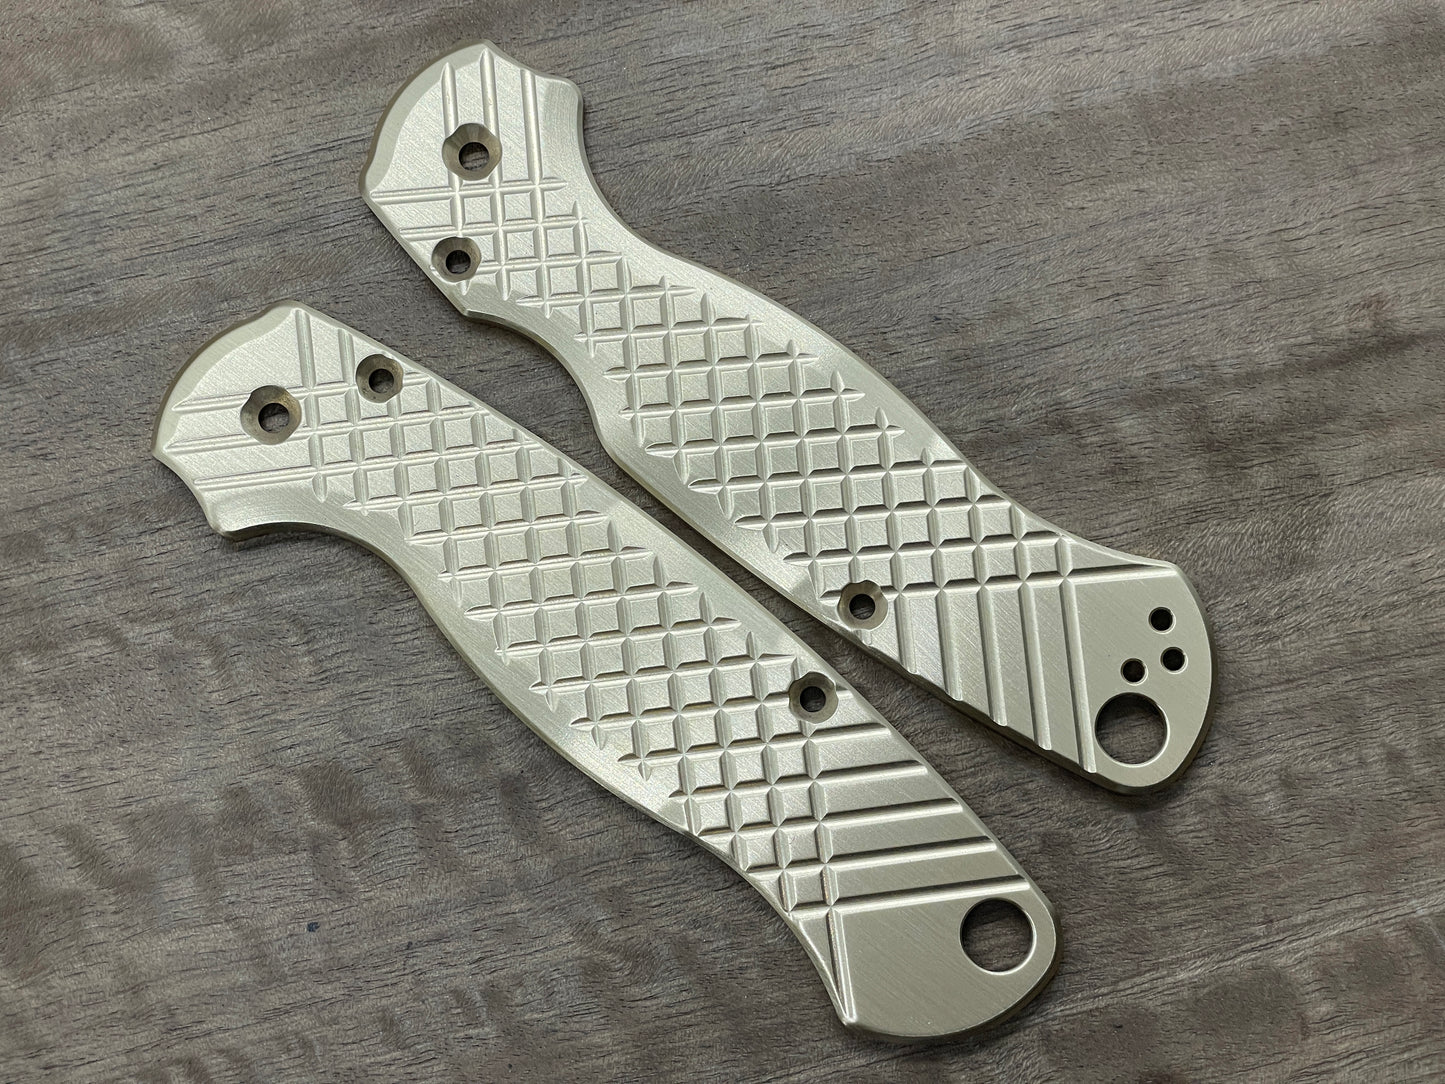 FRAG milled Brushed Brass Scales for Spyderco Paramilitary 2 PM2